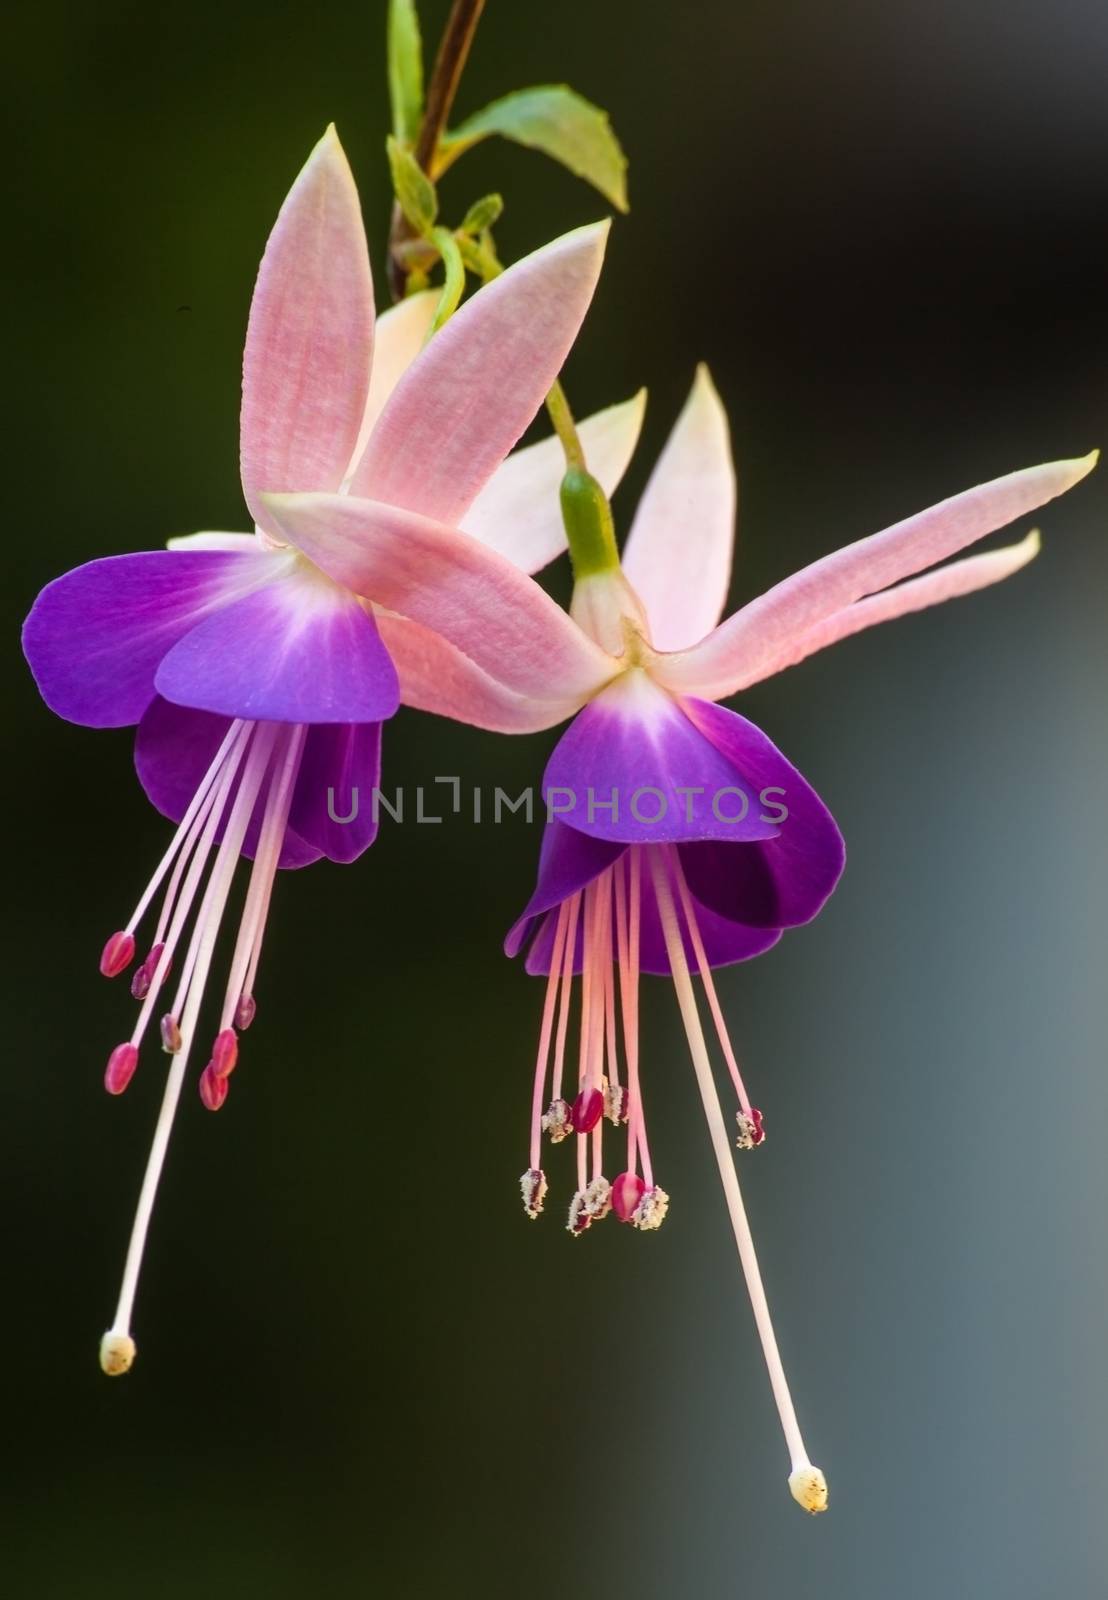 Group of Fuchsia flowers in macro on a dark background.